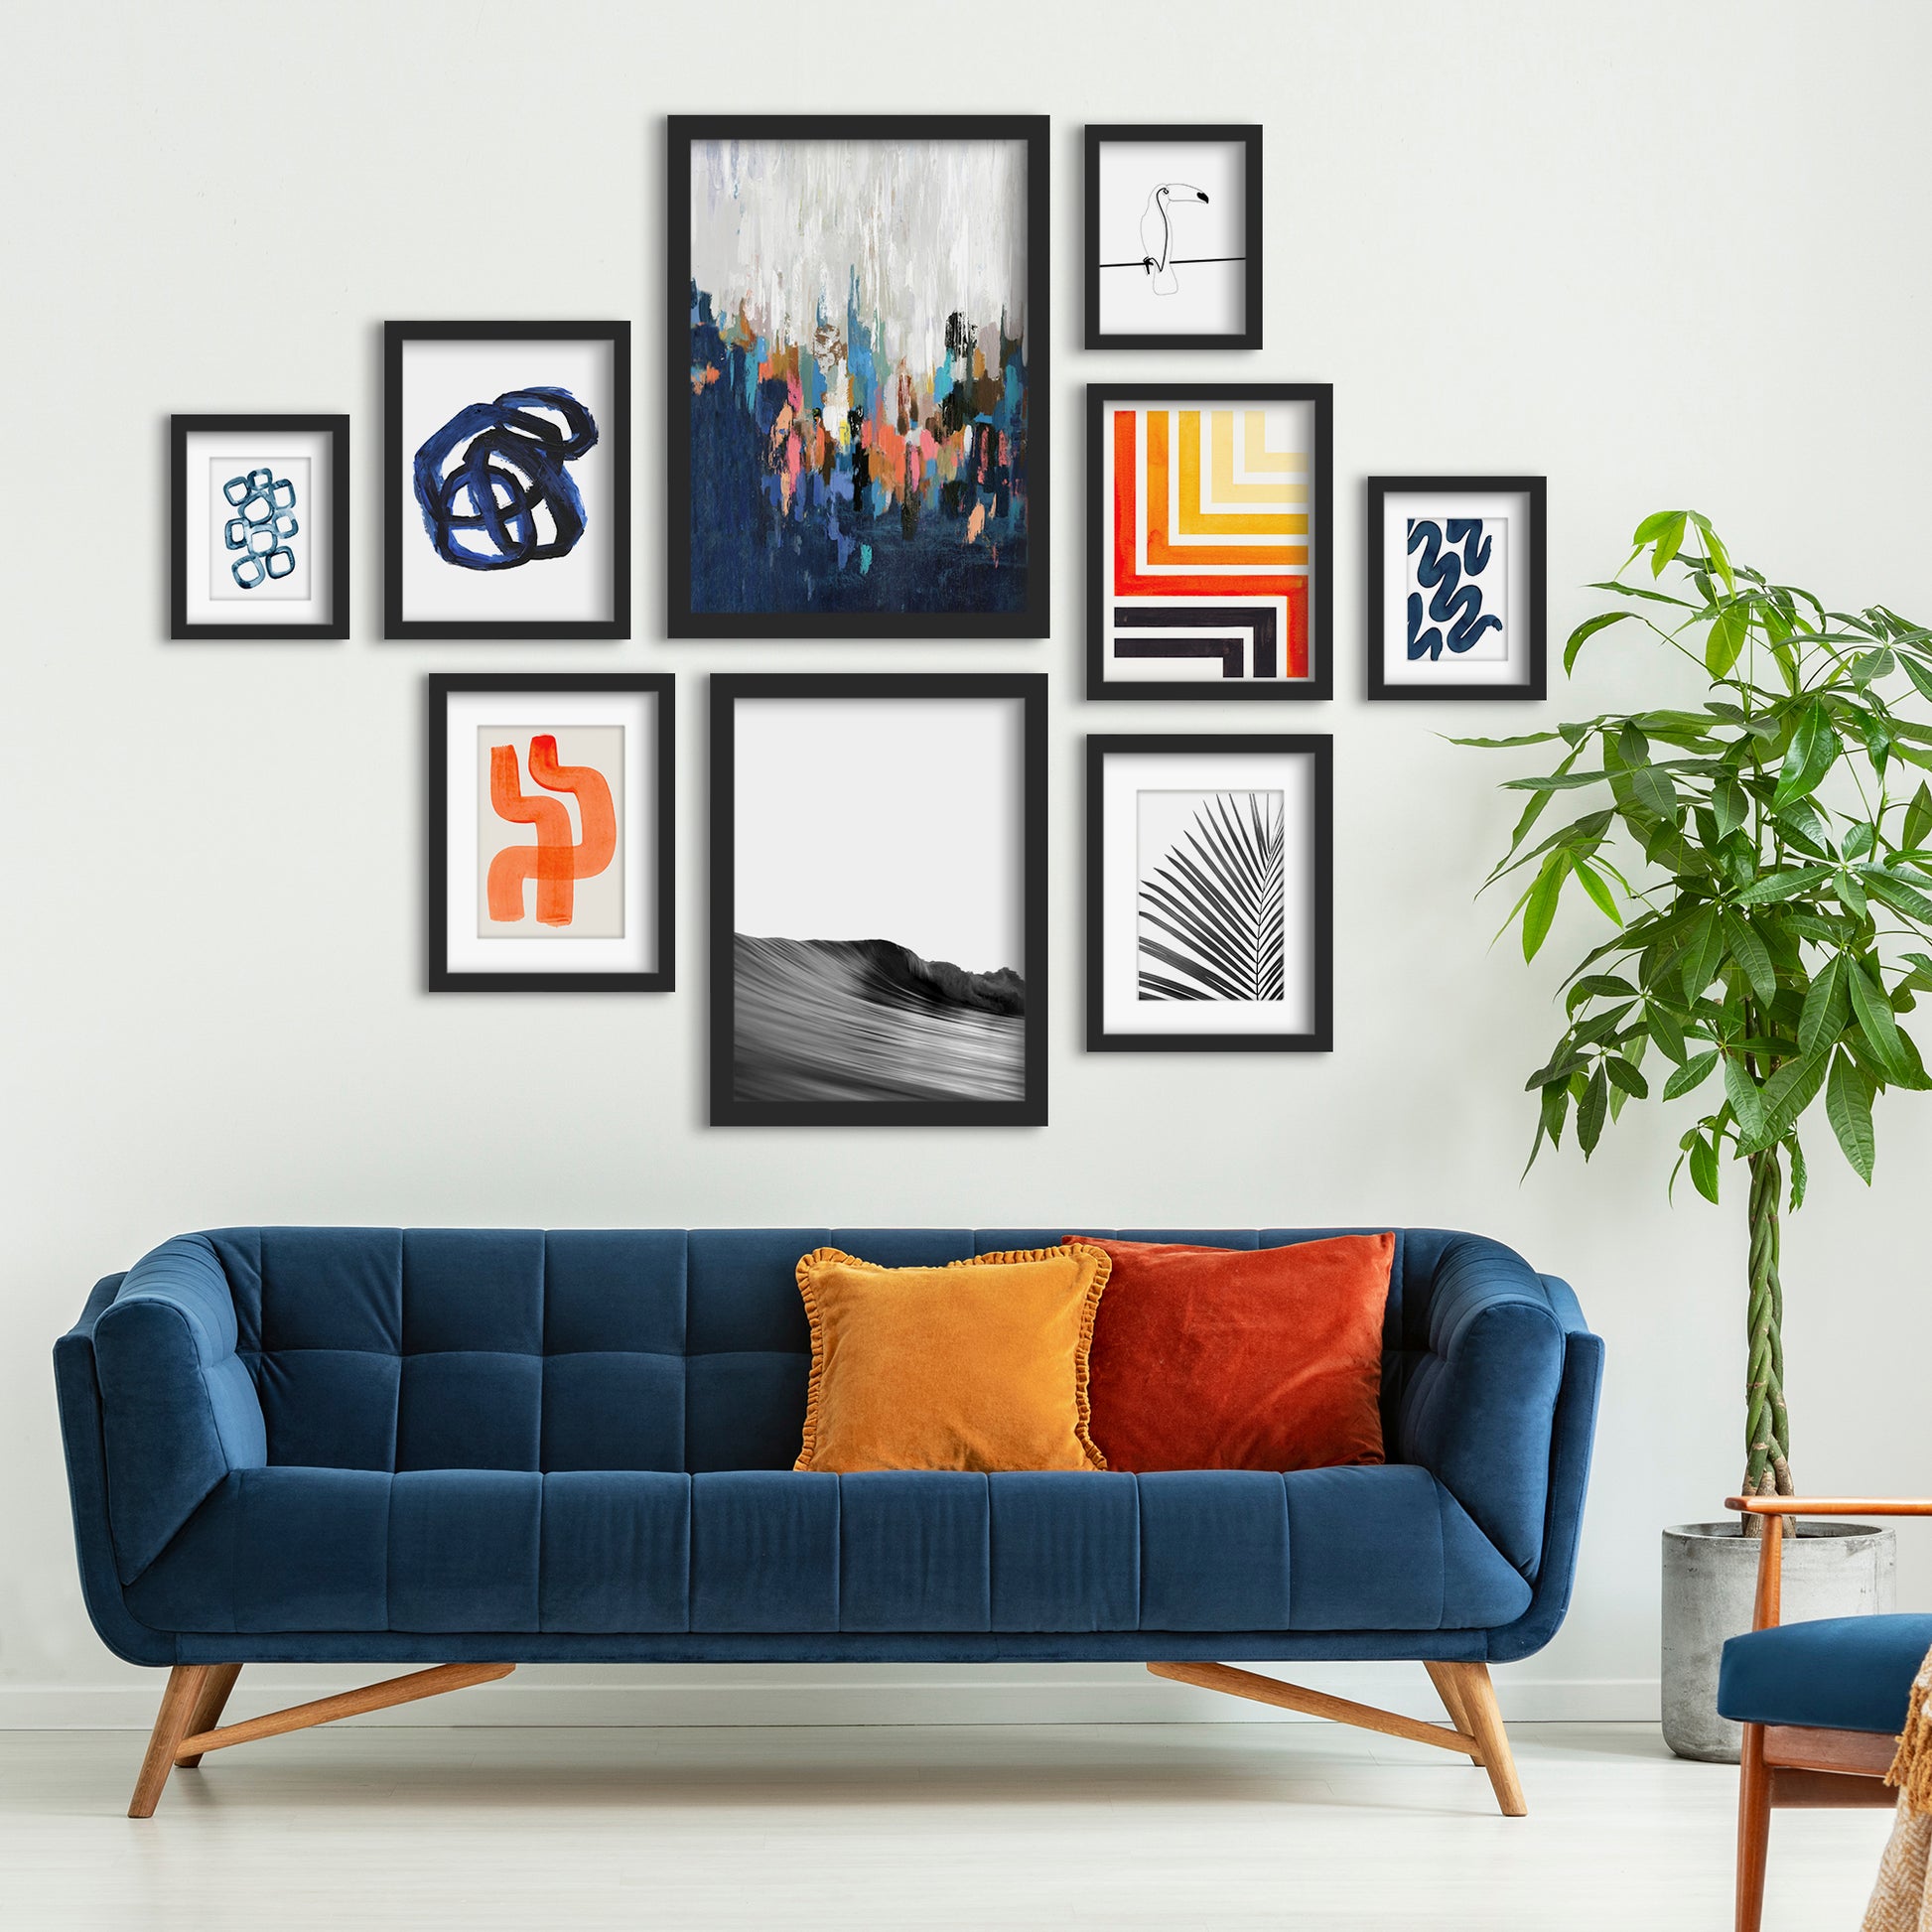 Gallery Perfect 7-piece Frame Set  Gallery wall living room, Frames on  wall, Frame wall collage